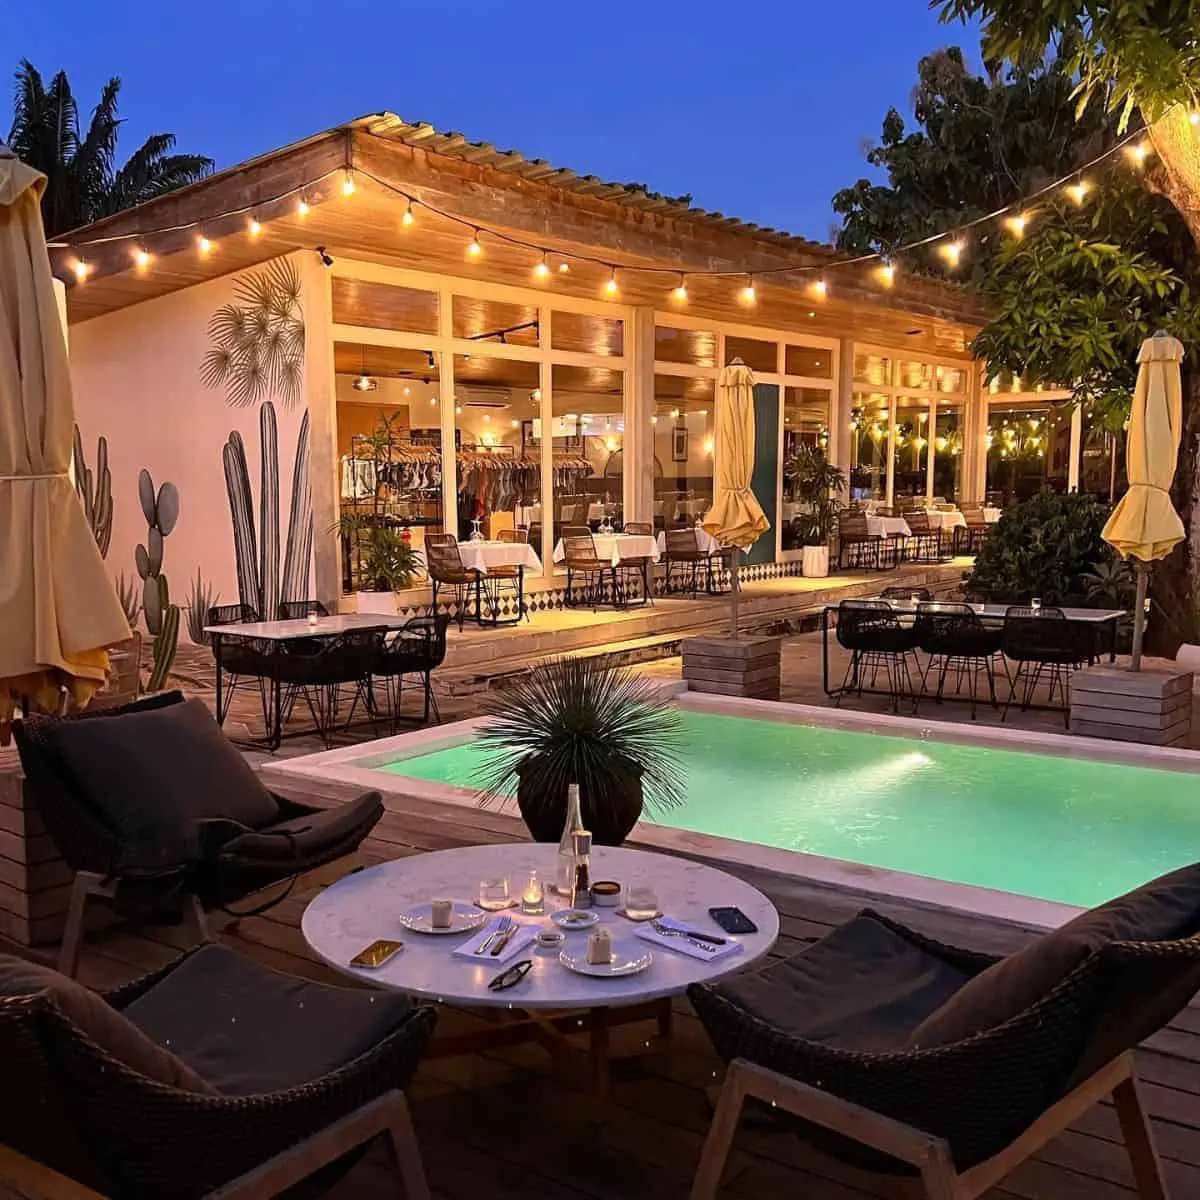 Gooseberry Cafe and Boutique scenic ambience with pool in the middle cafes in Bali